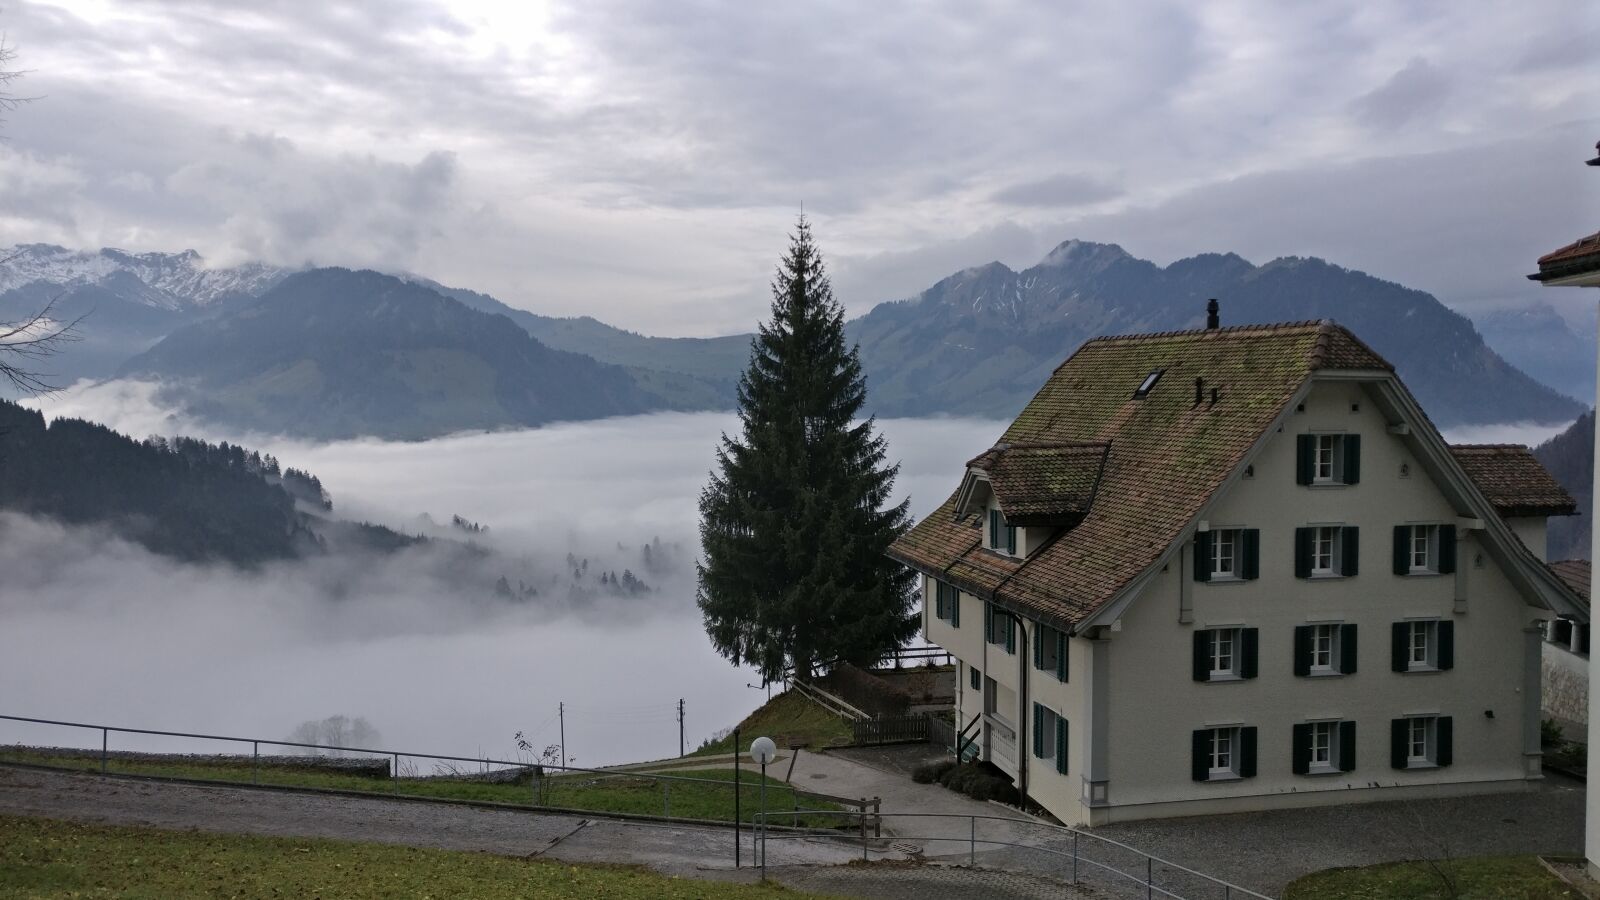 OnePlus A3000 sample photo. Fog, mountains, central switzerland photography